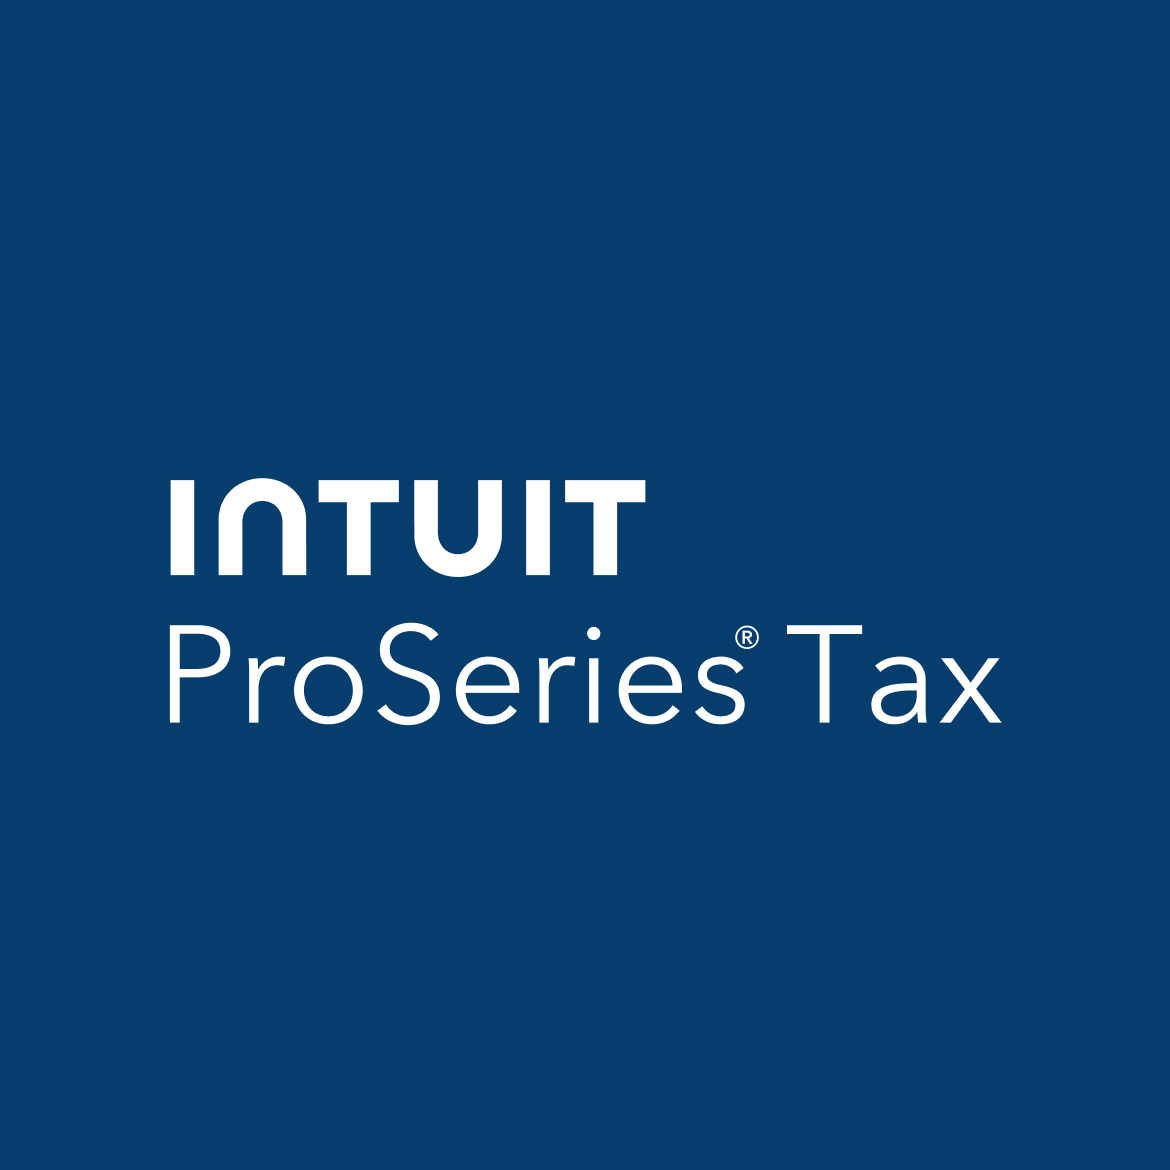 ProSeries Tax Software